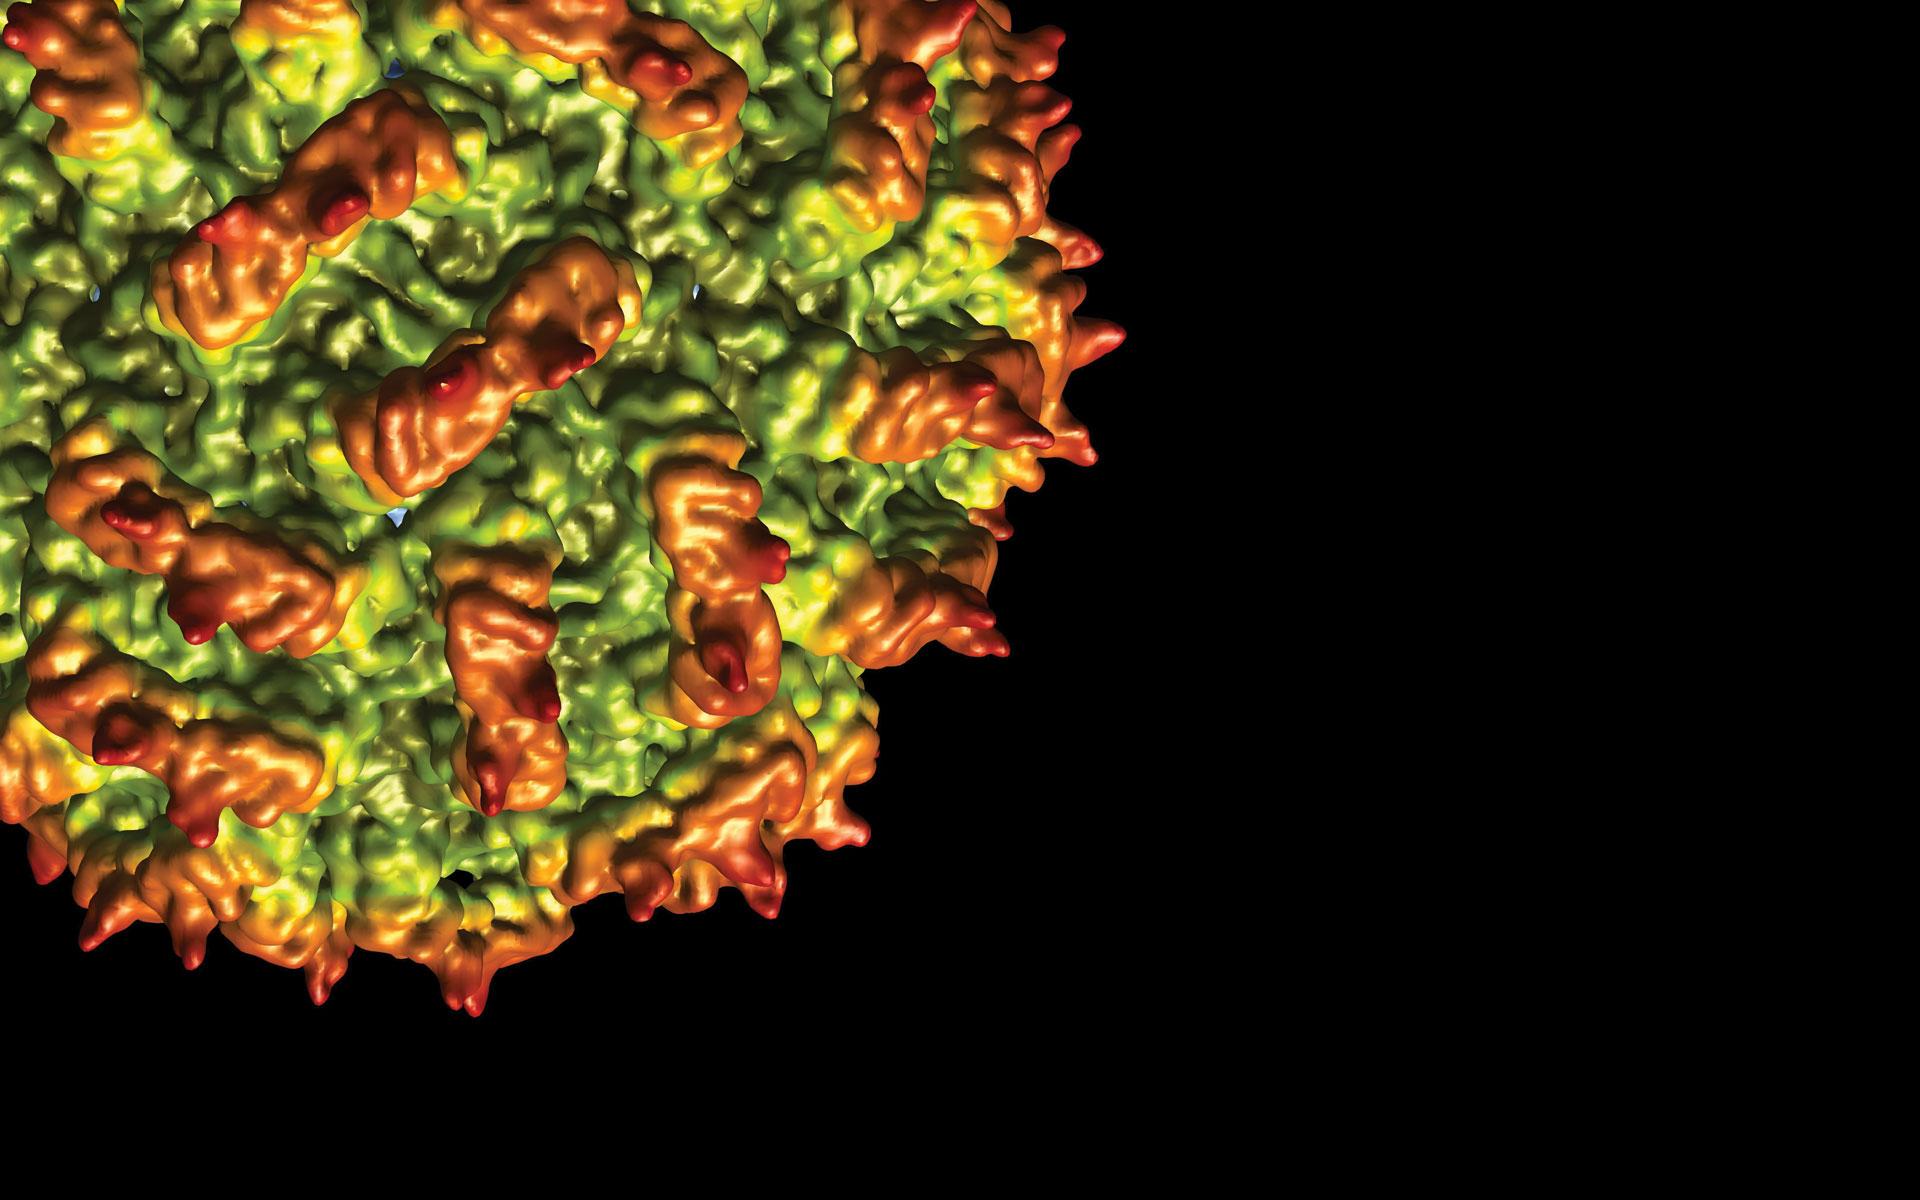 Virus wallpaper and image, picture, photo